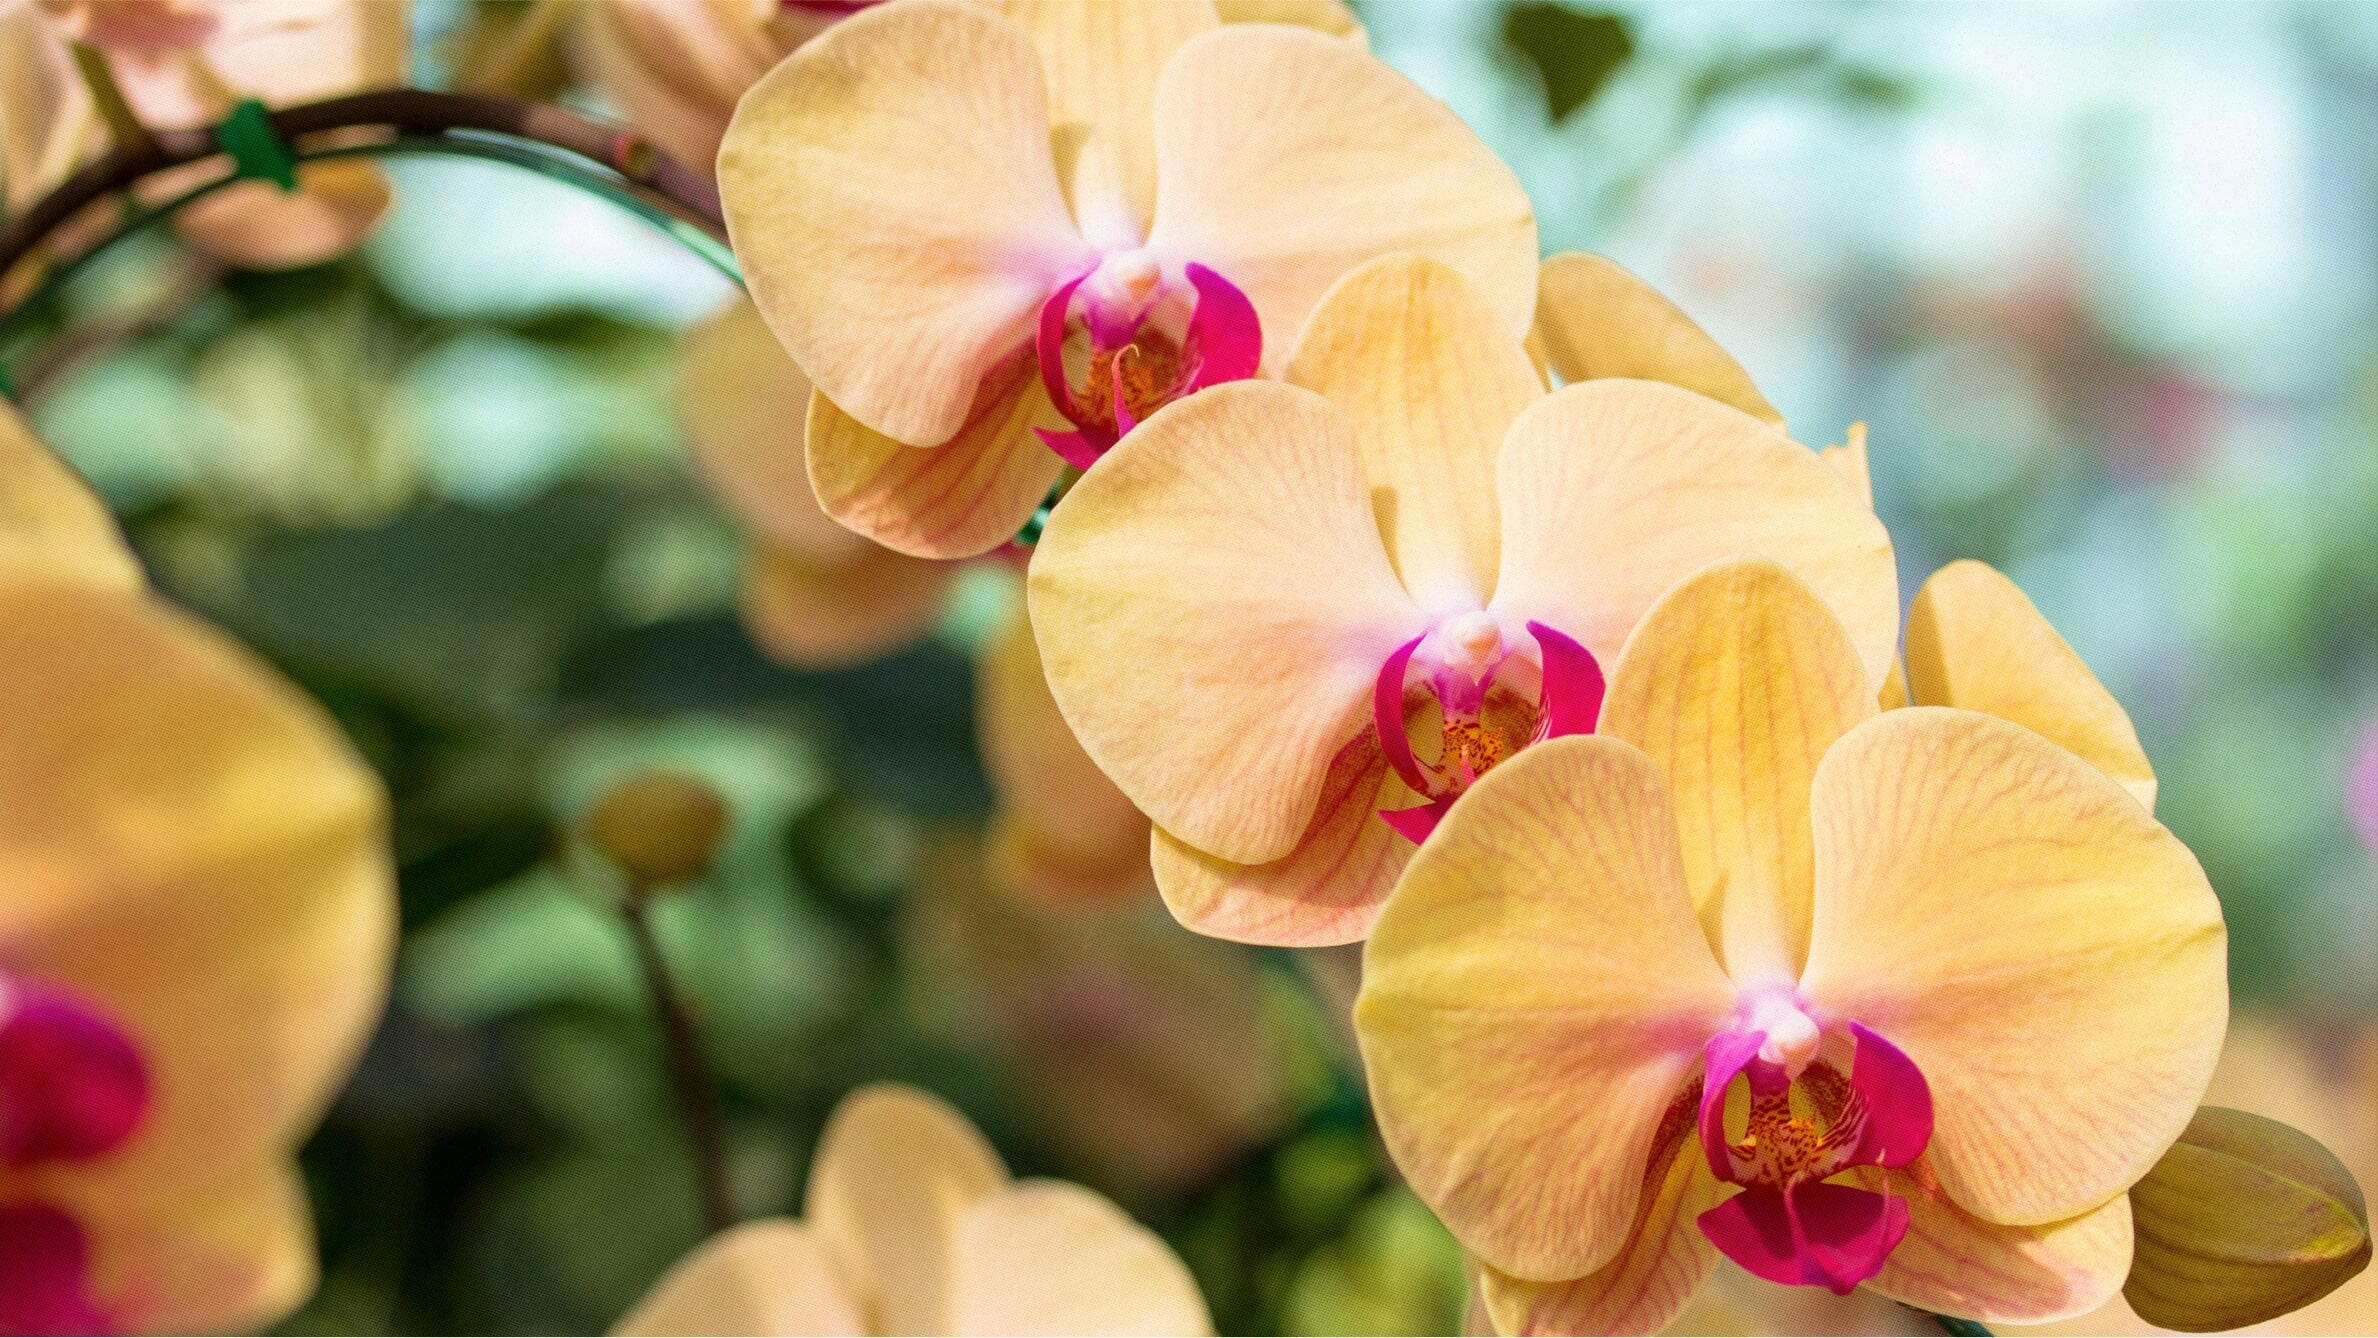 The meaning of orchid flower